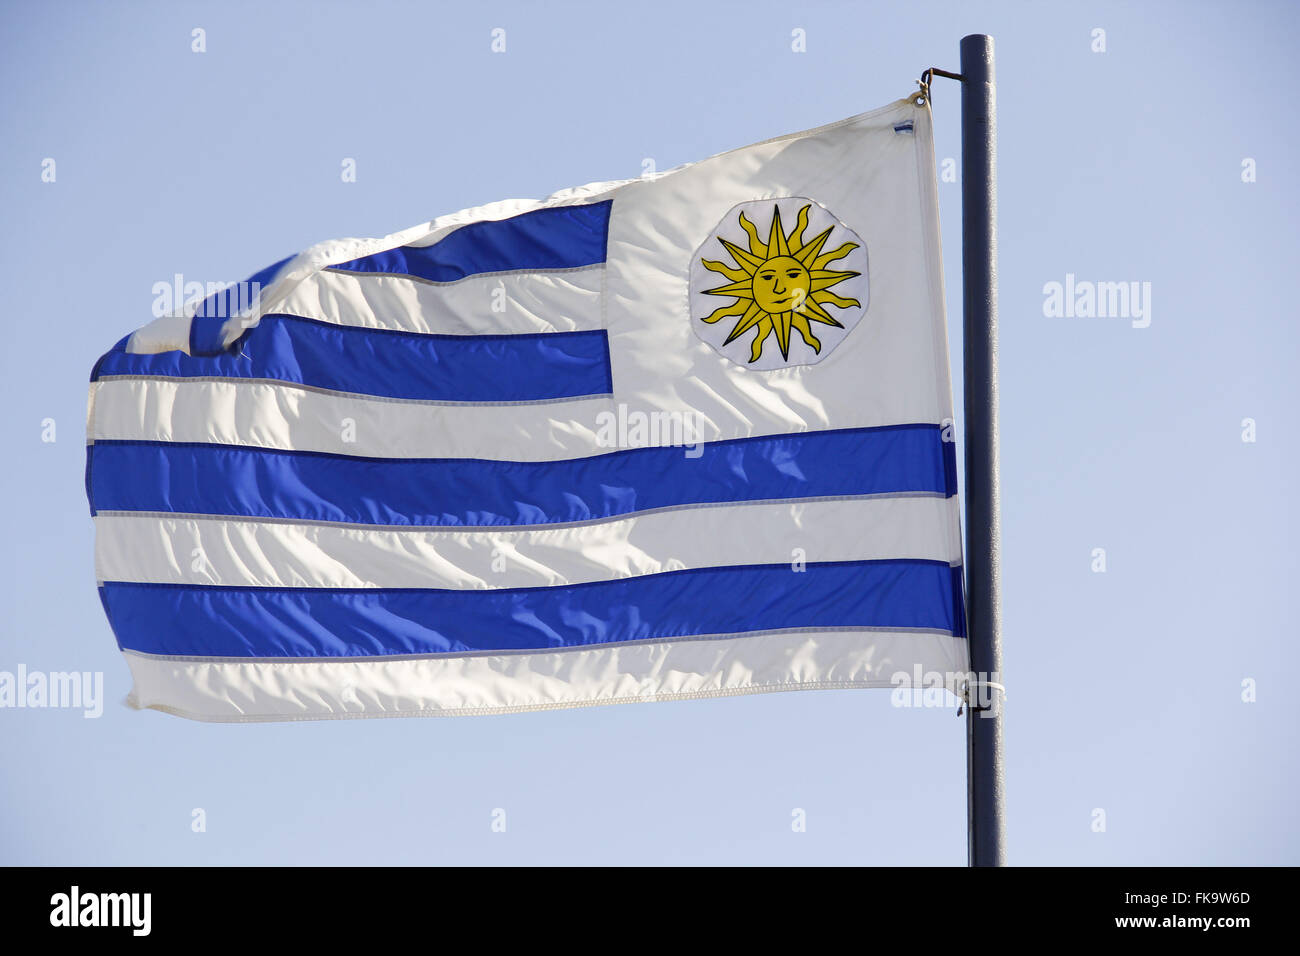 Argentine flag hoisted in front of the Tourism Department in Praia do Forte Stock Photo